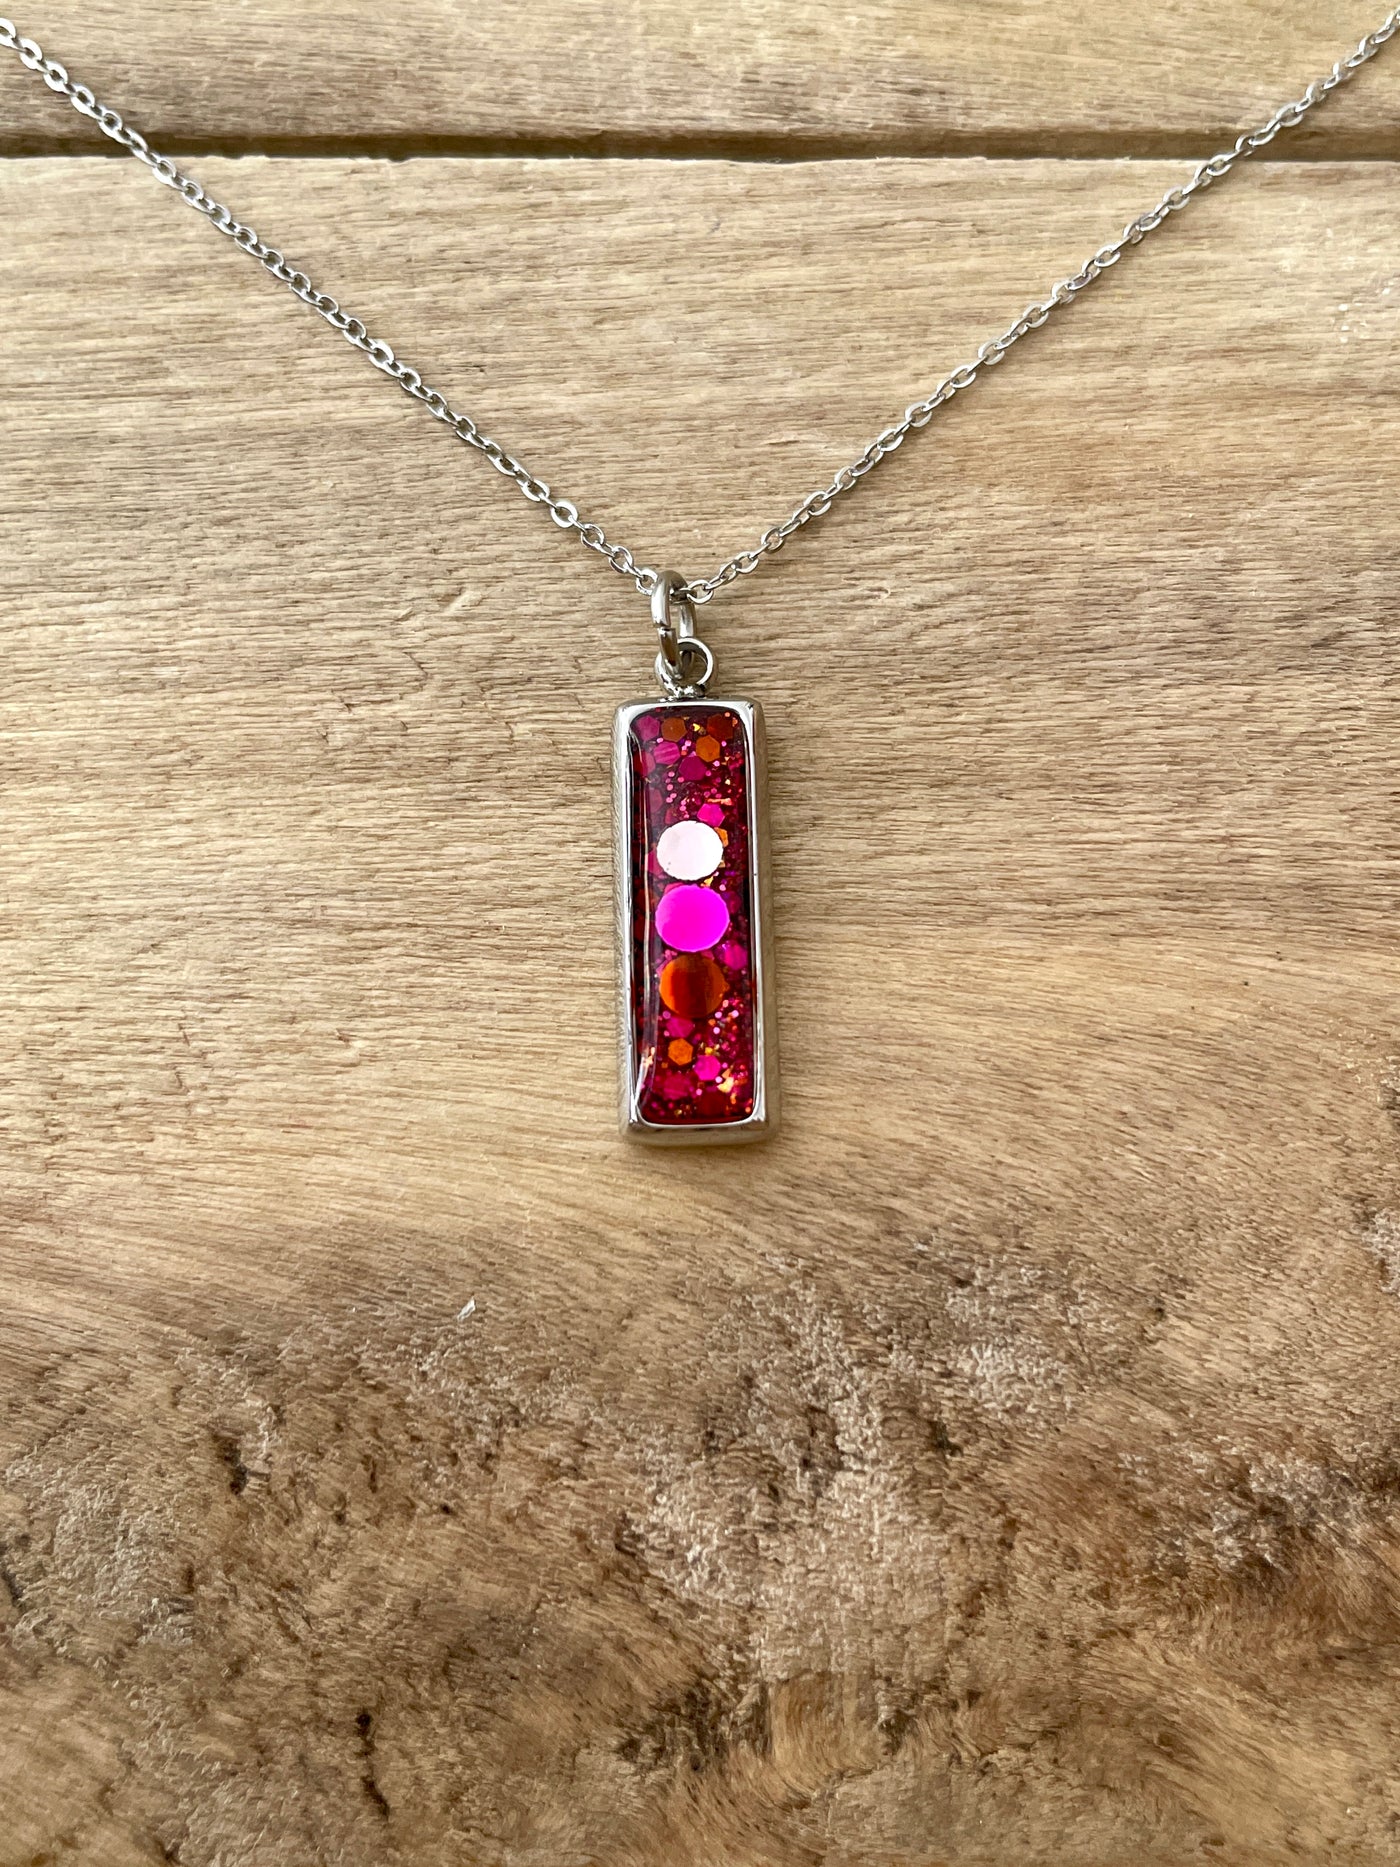 Simple silver RECTANGLE Throat Chakra necklace